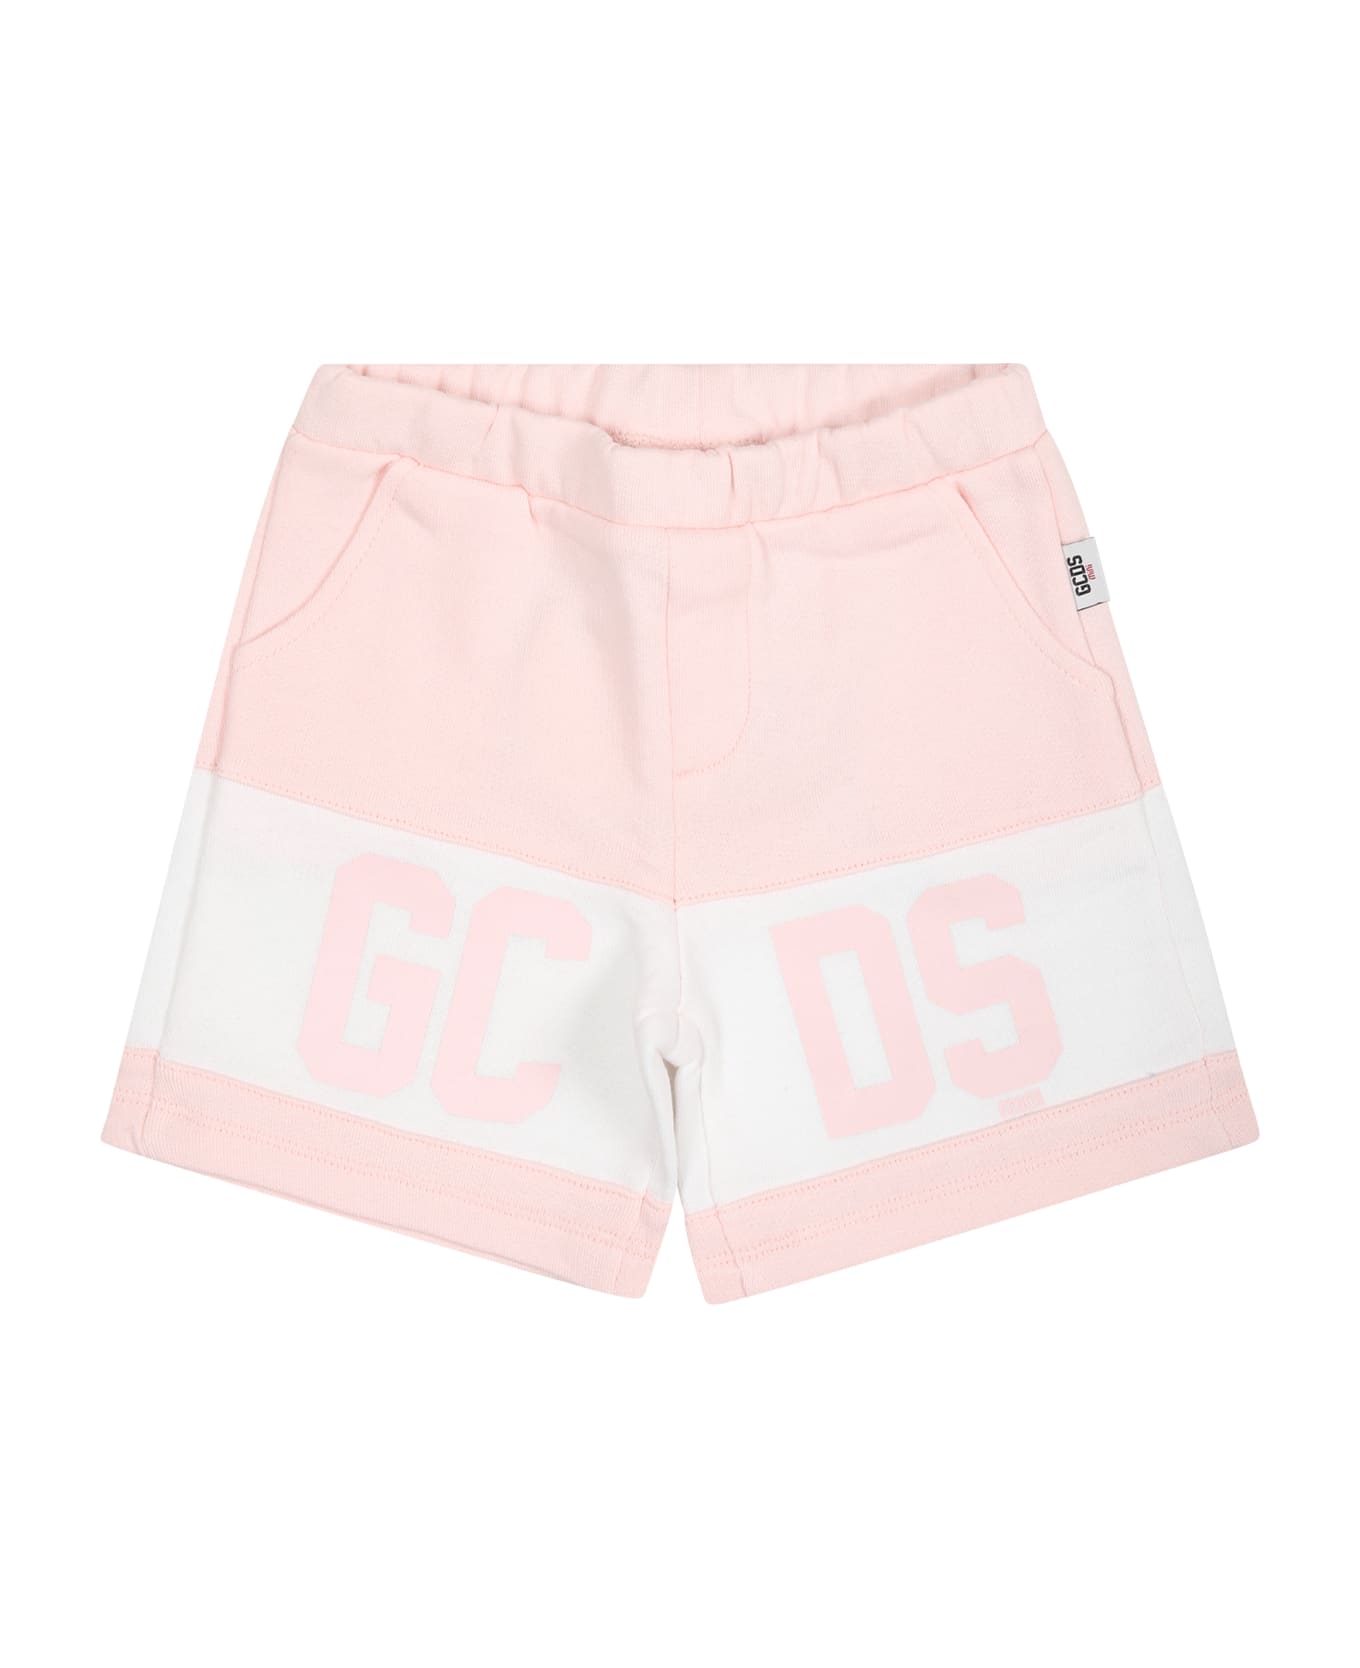 GCDS Mini Pink Sports Shorts For Babies With Logo - Pink